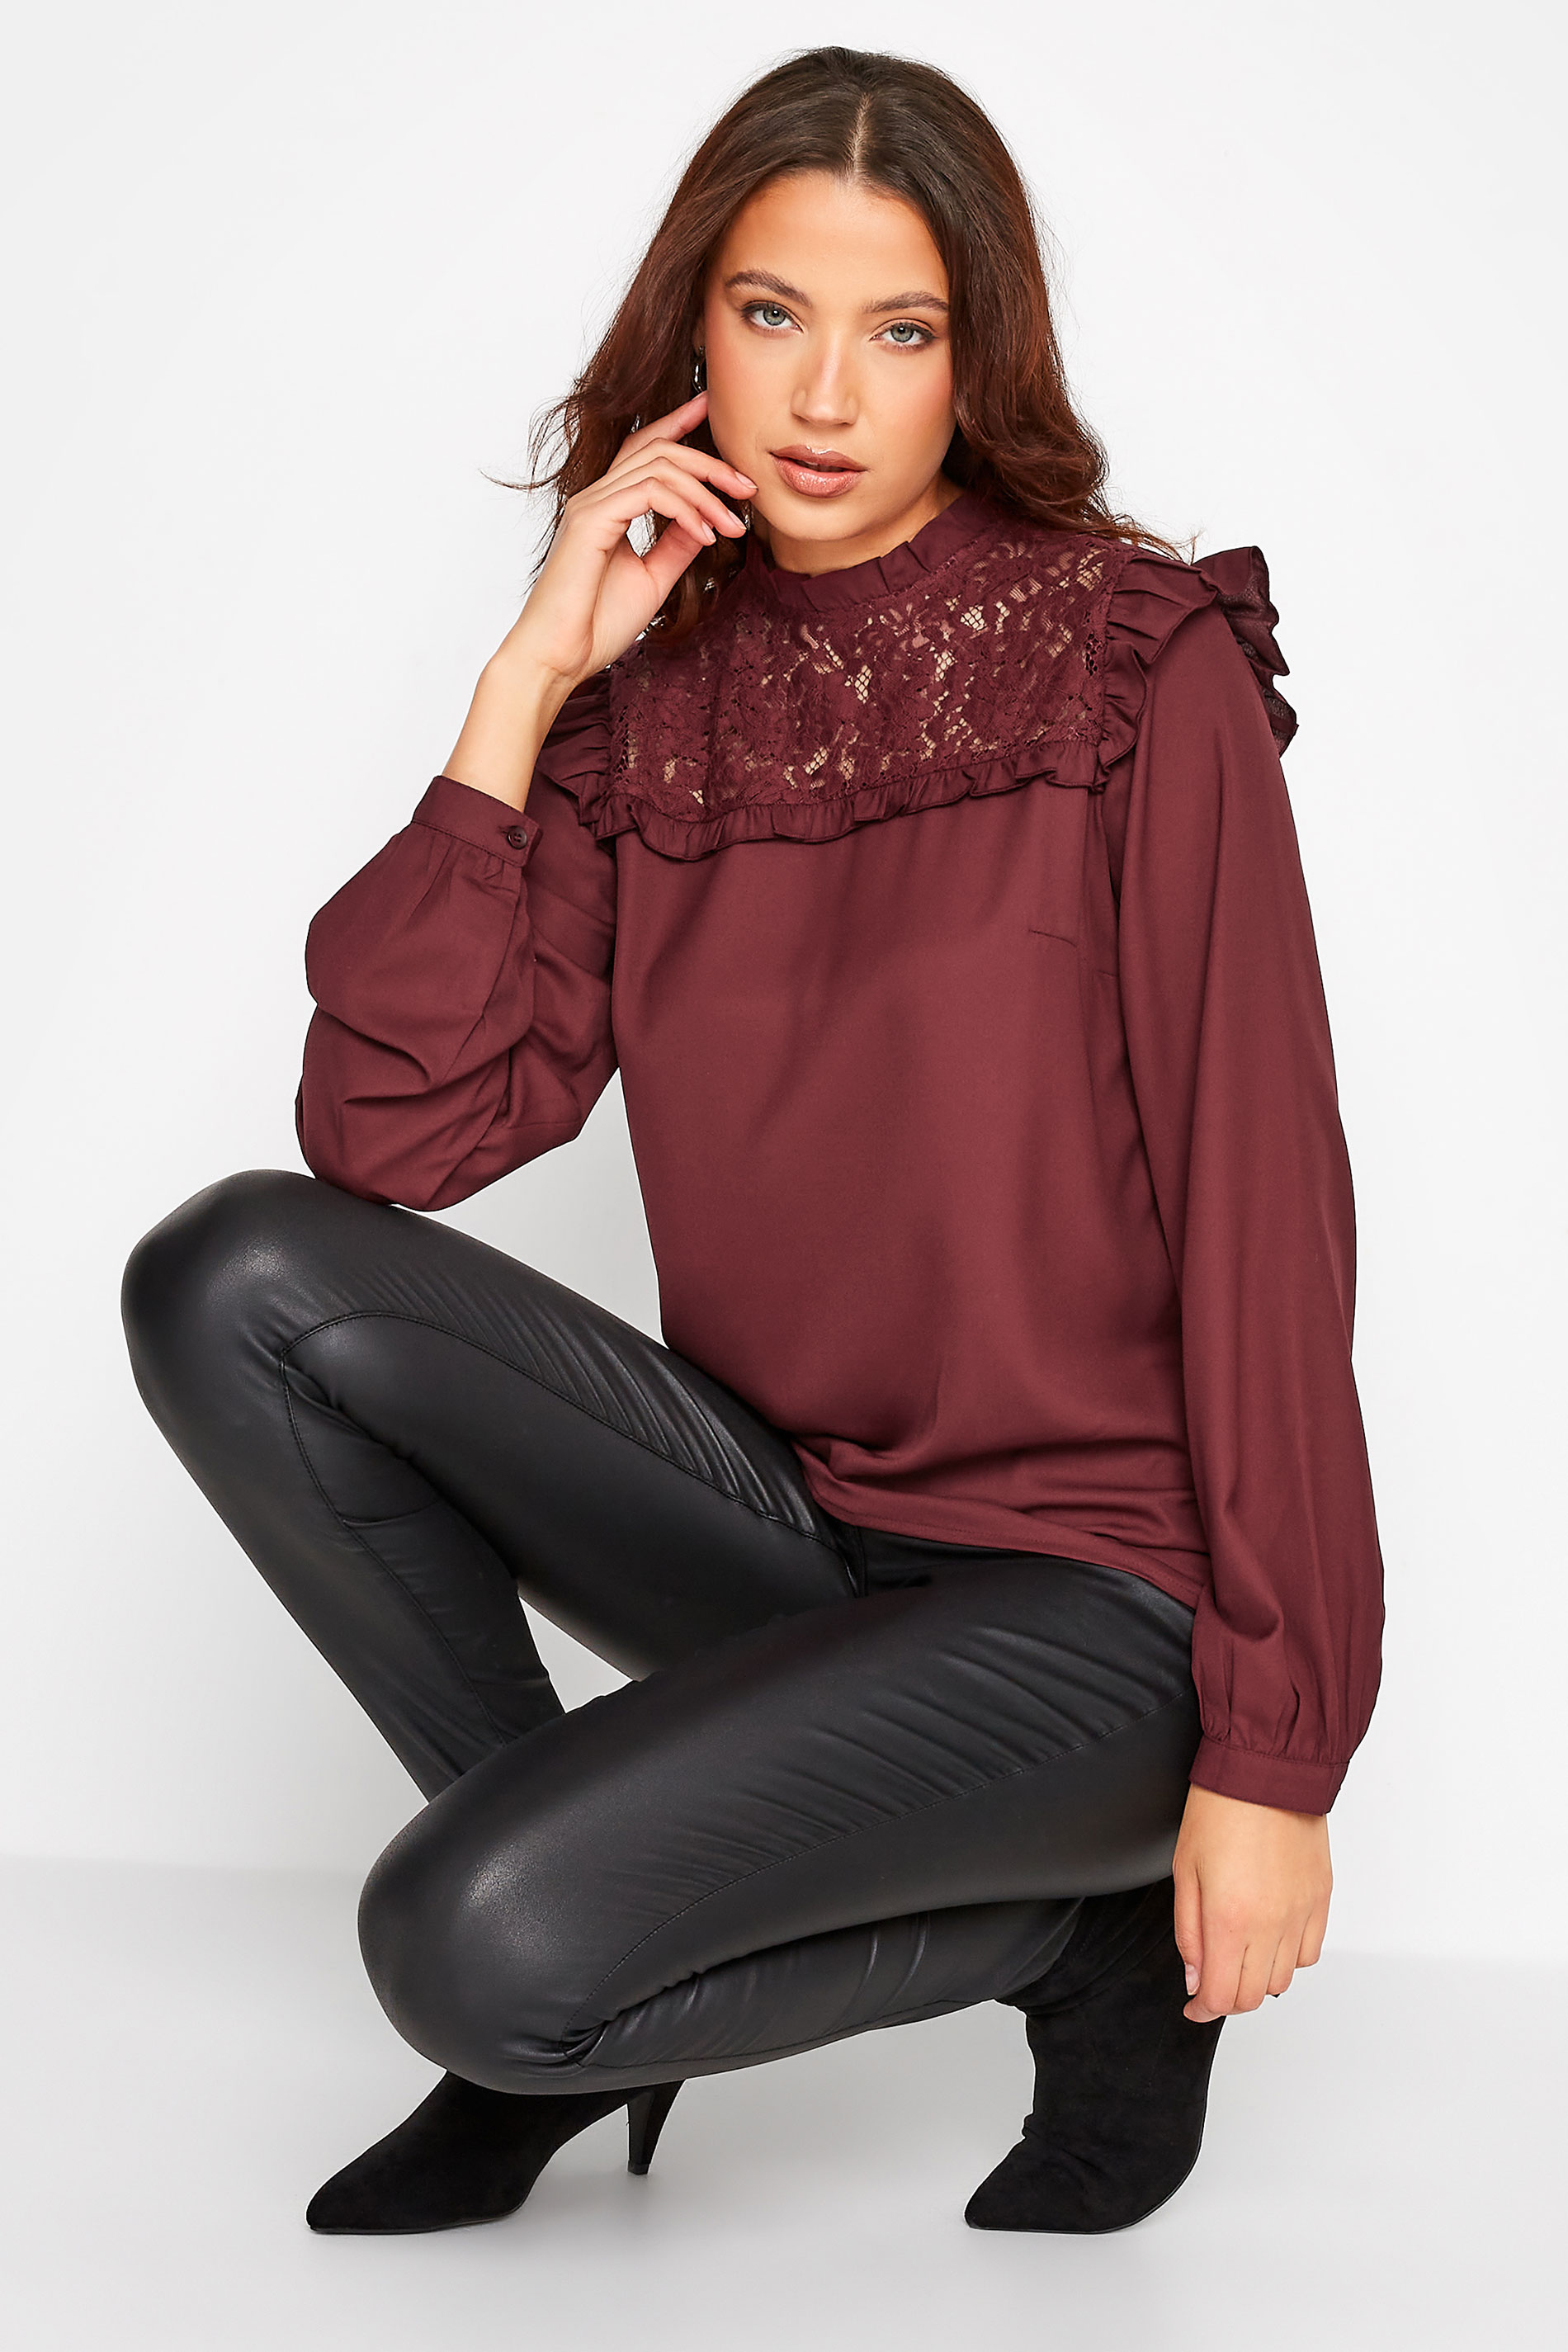 LTS Tall Women's Burgundy Red Lace Detail Blouse | Long Tall Sally 1